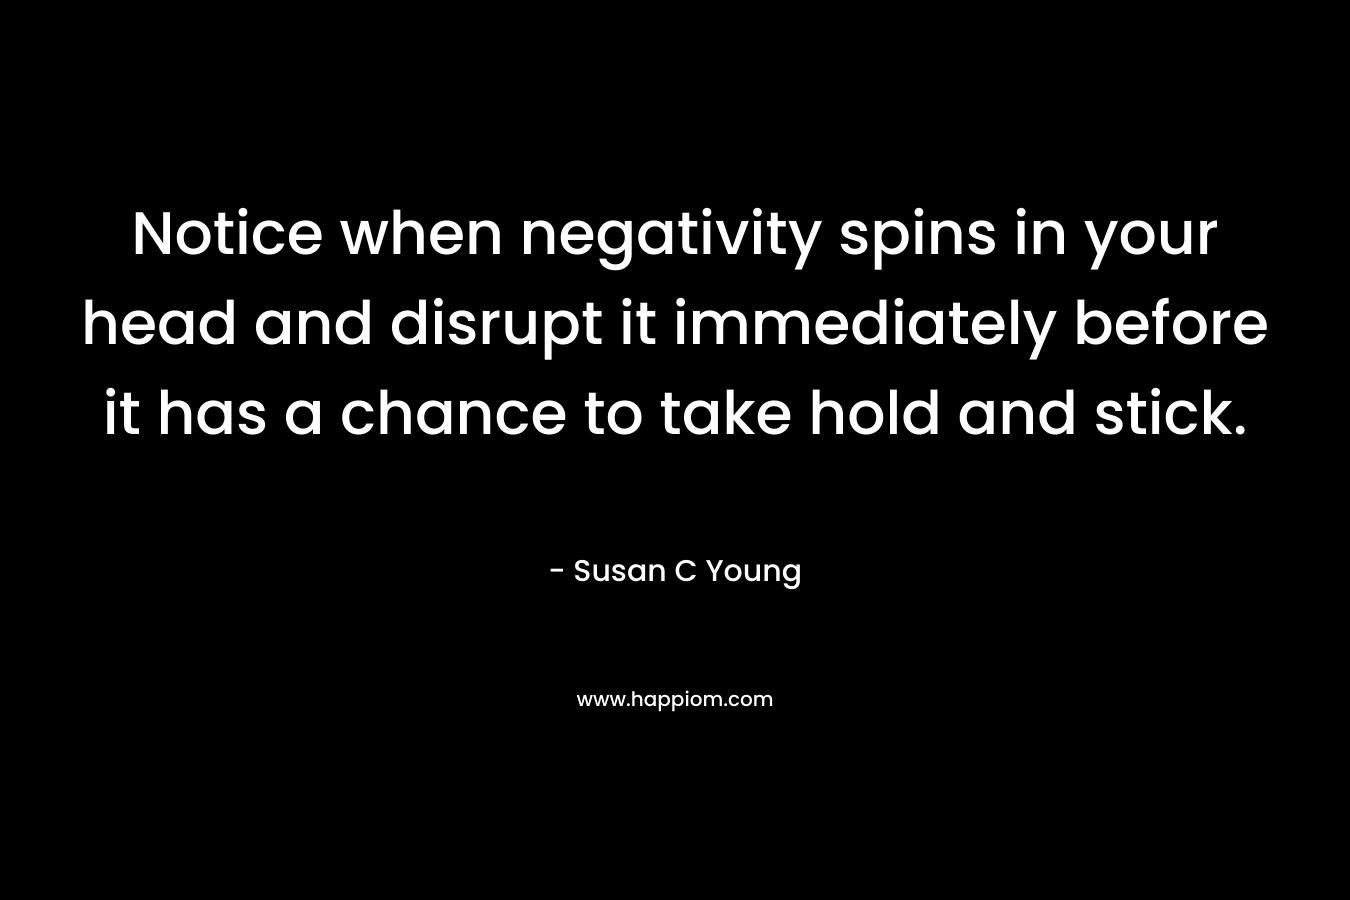 Notice when negativity spins in your head and disrupt it immediately before it has a chance to take hold and stick.